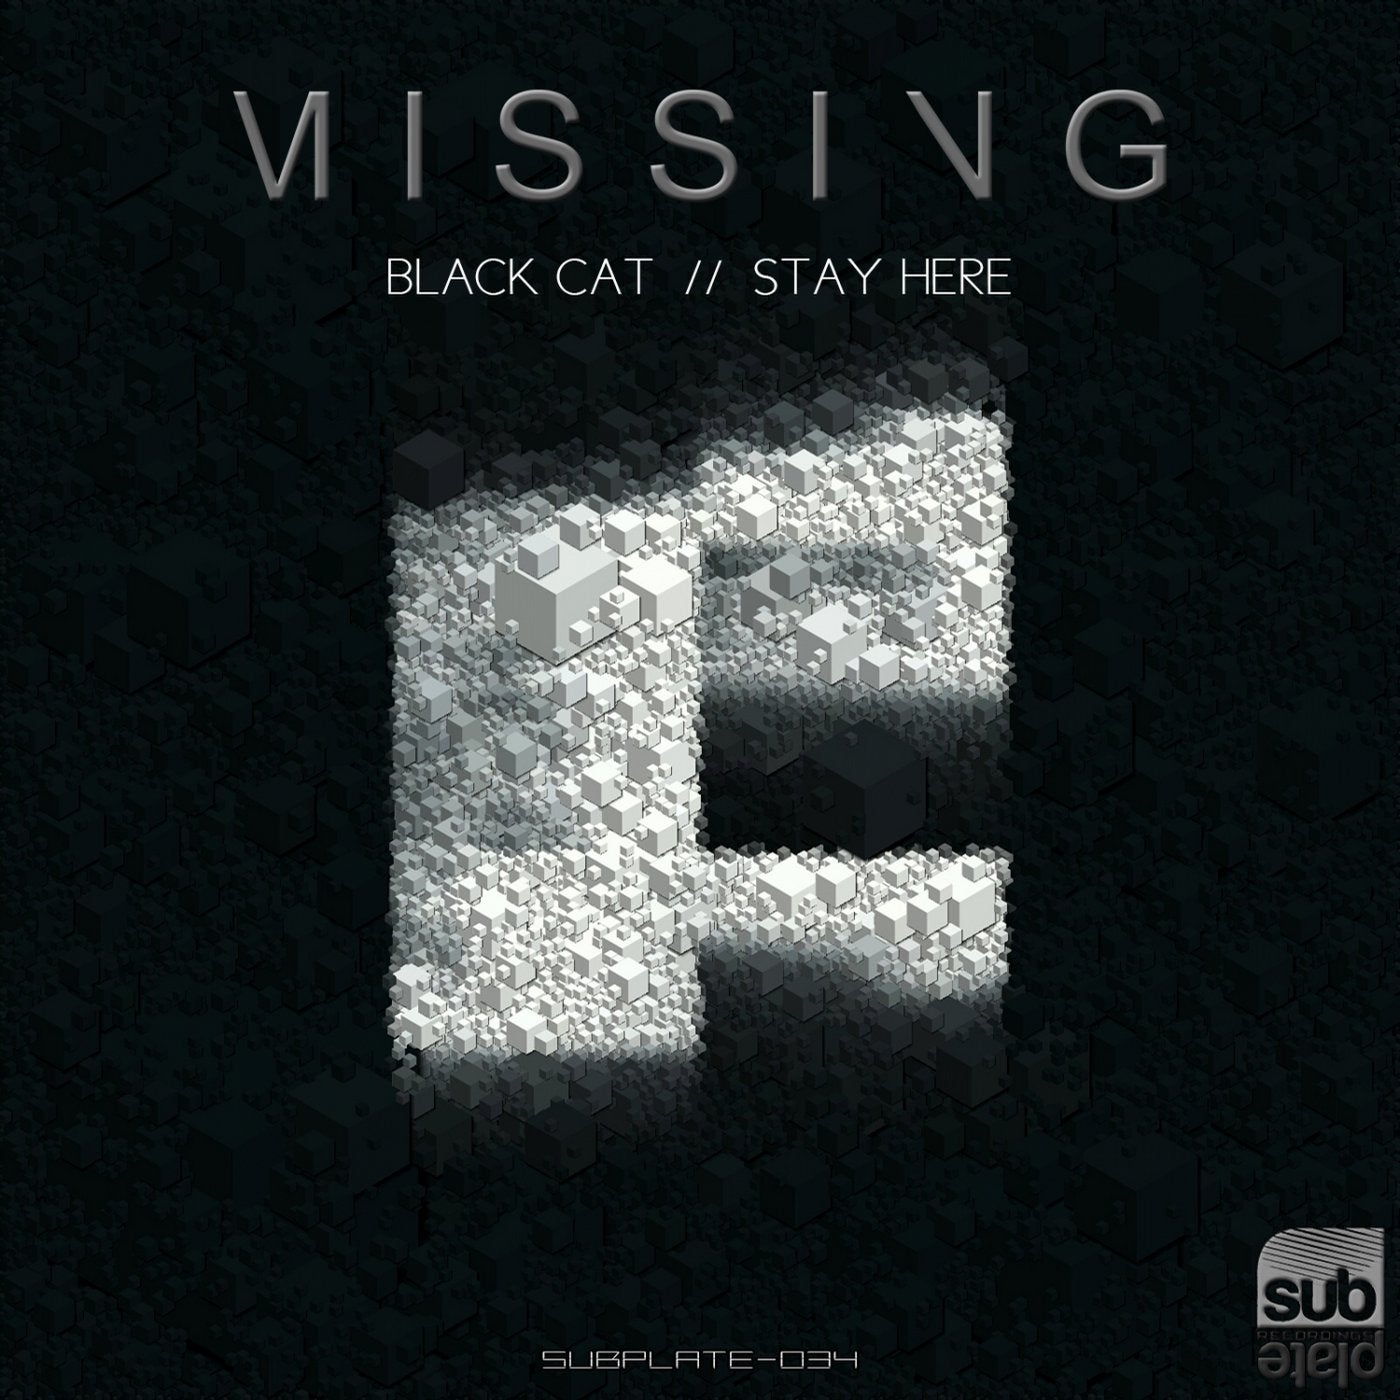 Black Cat / Stay here